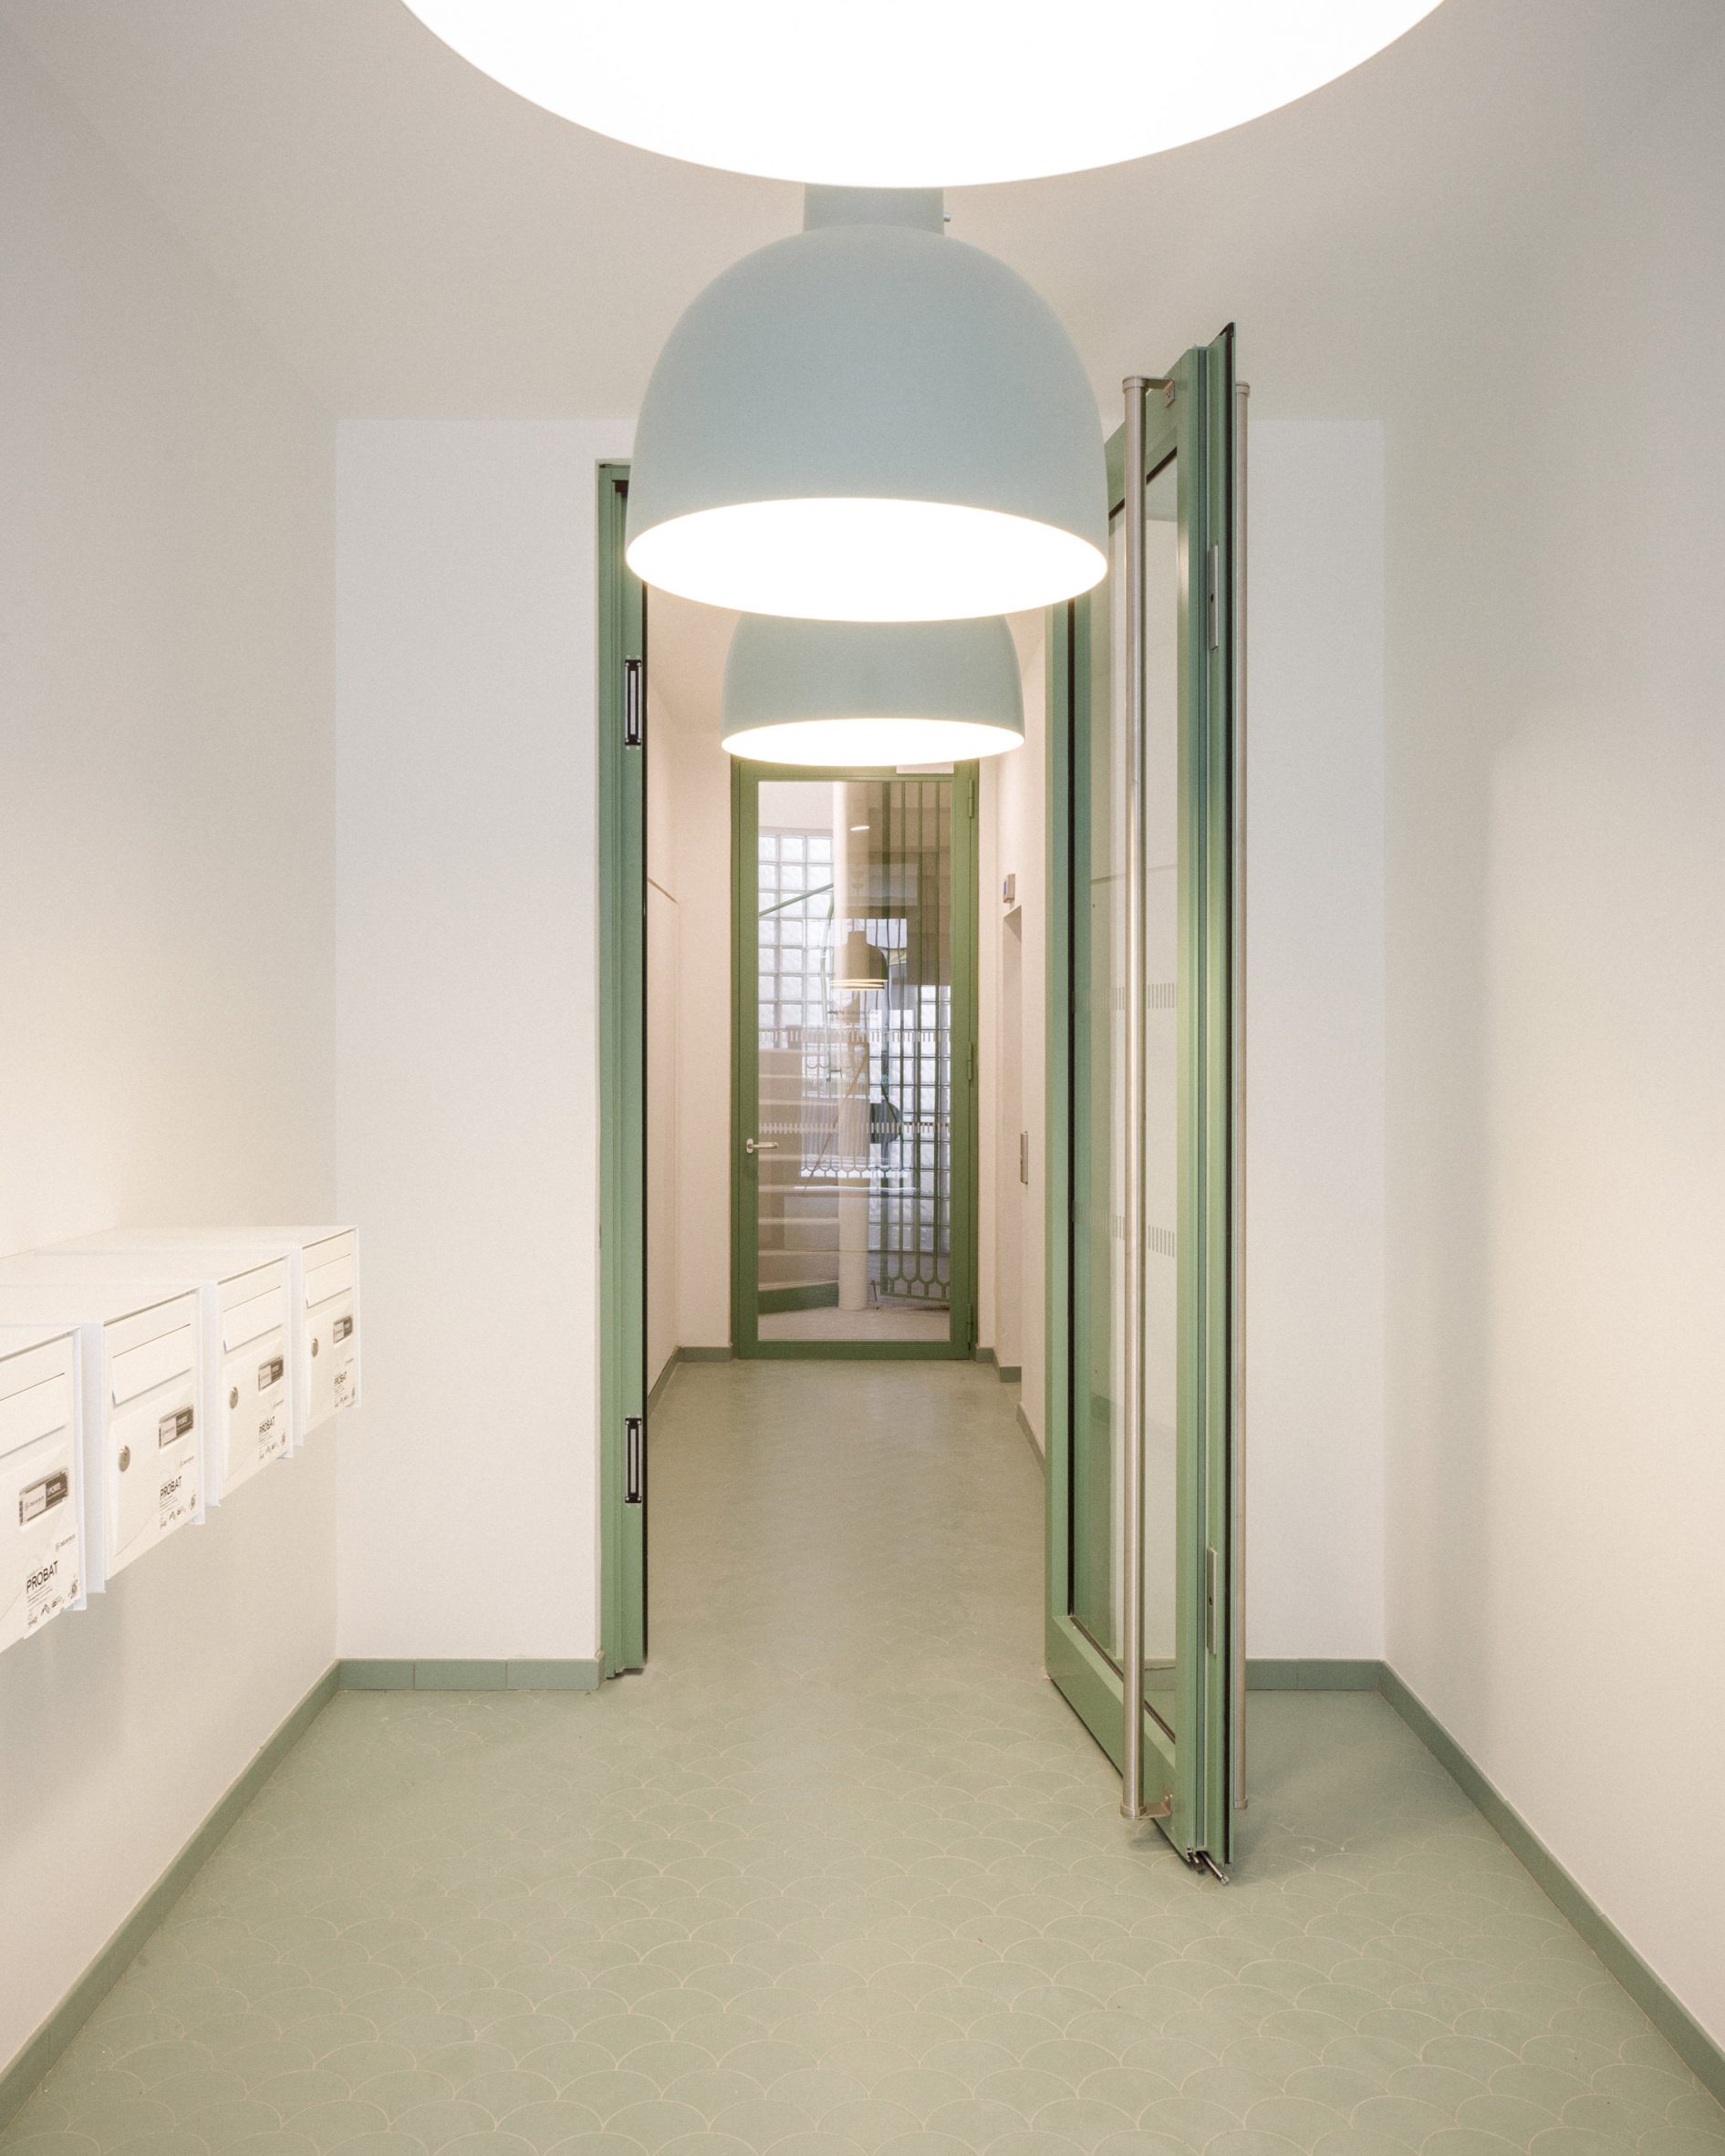 Lobby of Jean Christophe Quinton's Paris social housing project with white postboxes on the left, soft green ogee tiles on the floor, green door frames and skirting boards and paler green overhead lamp shades